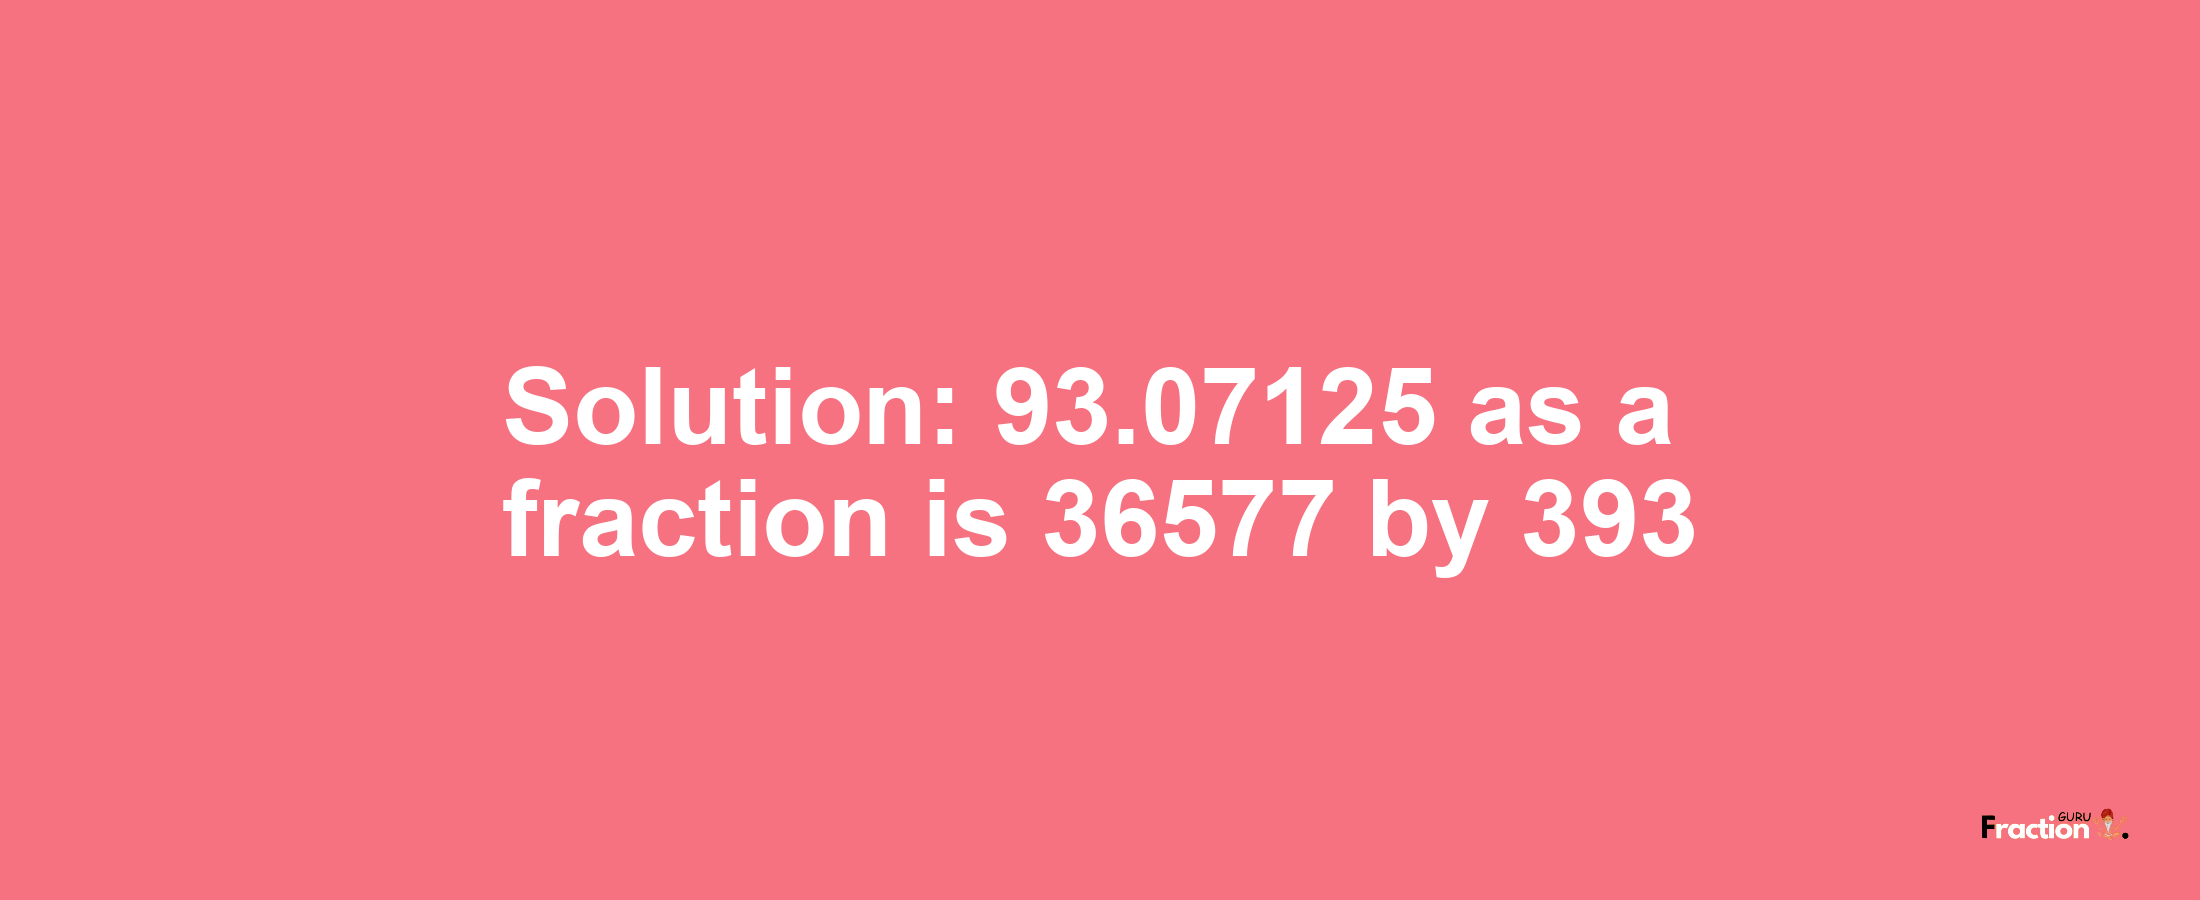 Solution:93.07125 as a fraction is 36577/393